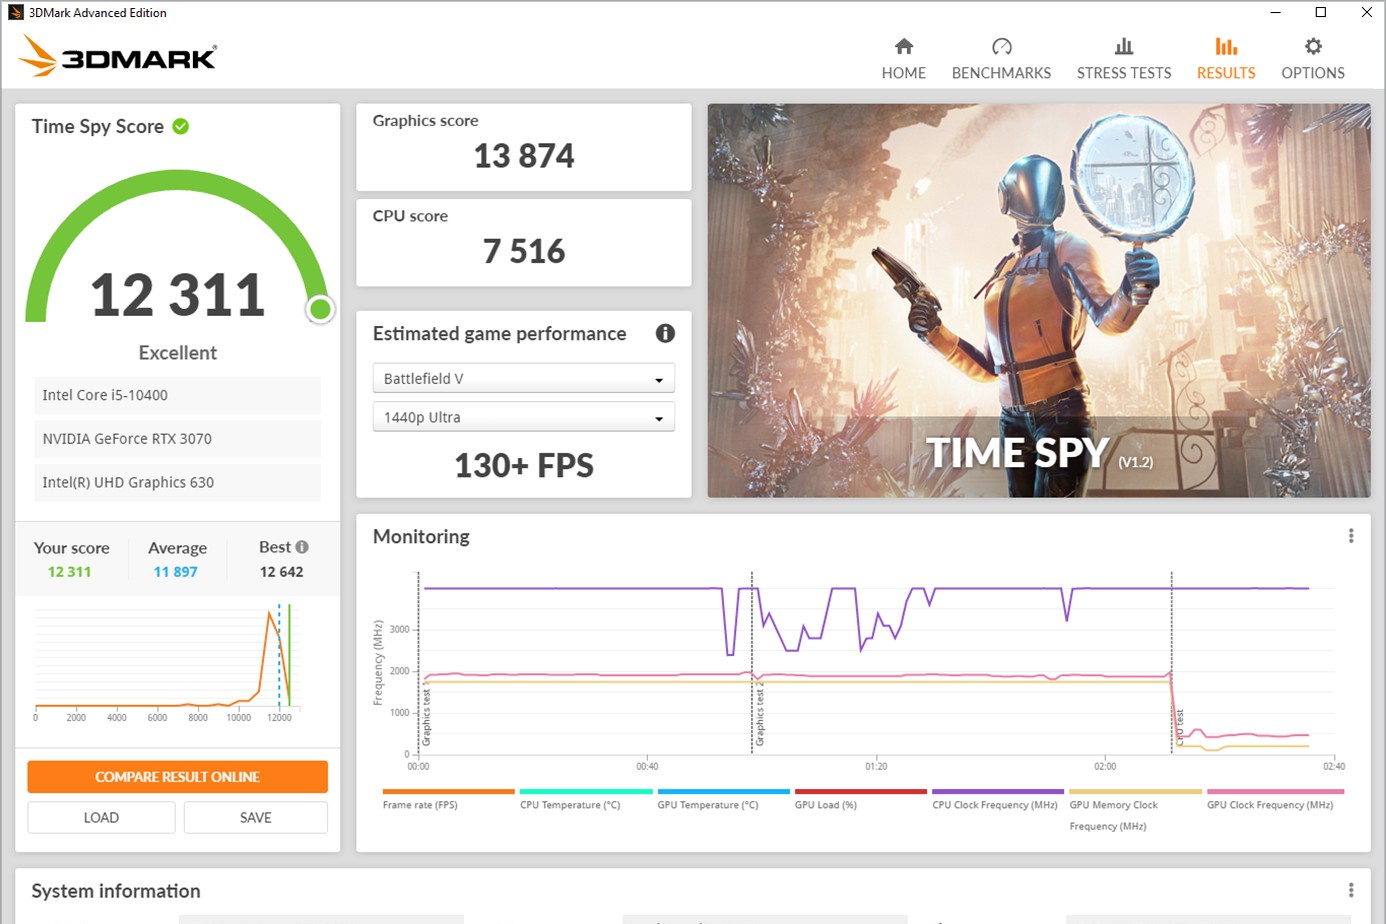 The 10 Best GPU Benchmark Software for PC (Free & Paid)